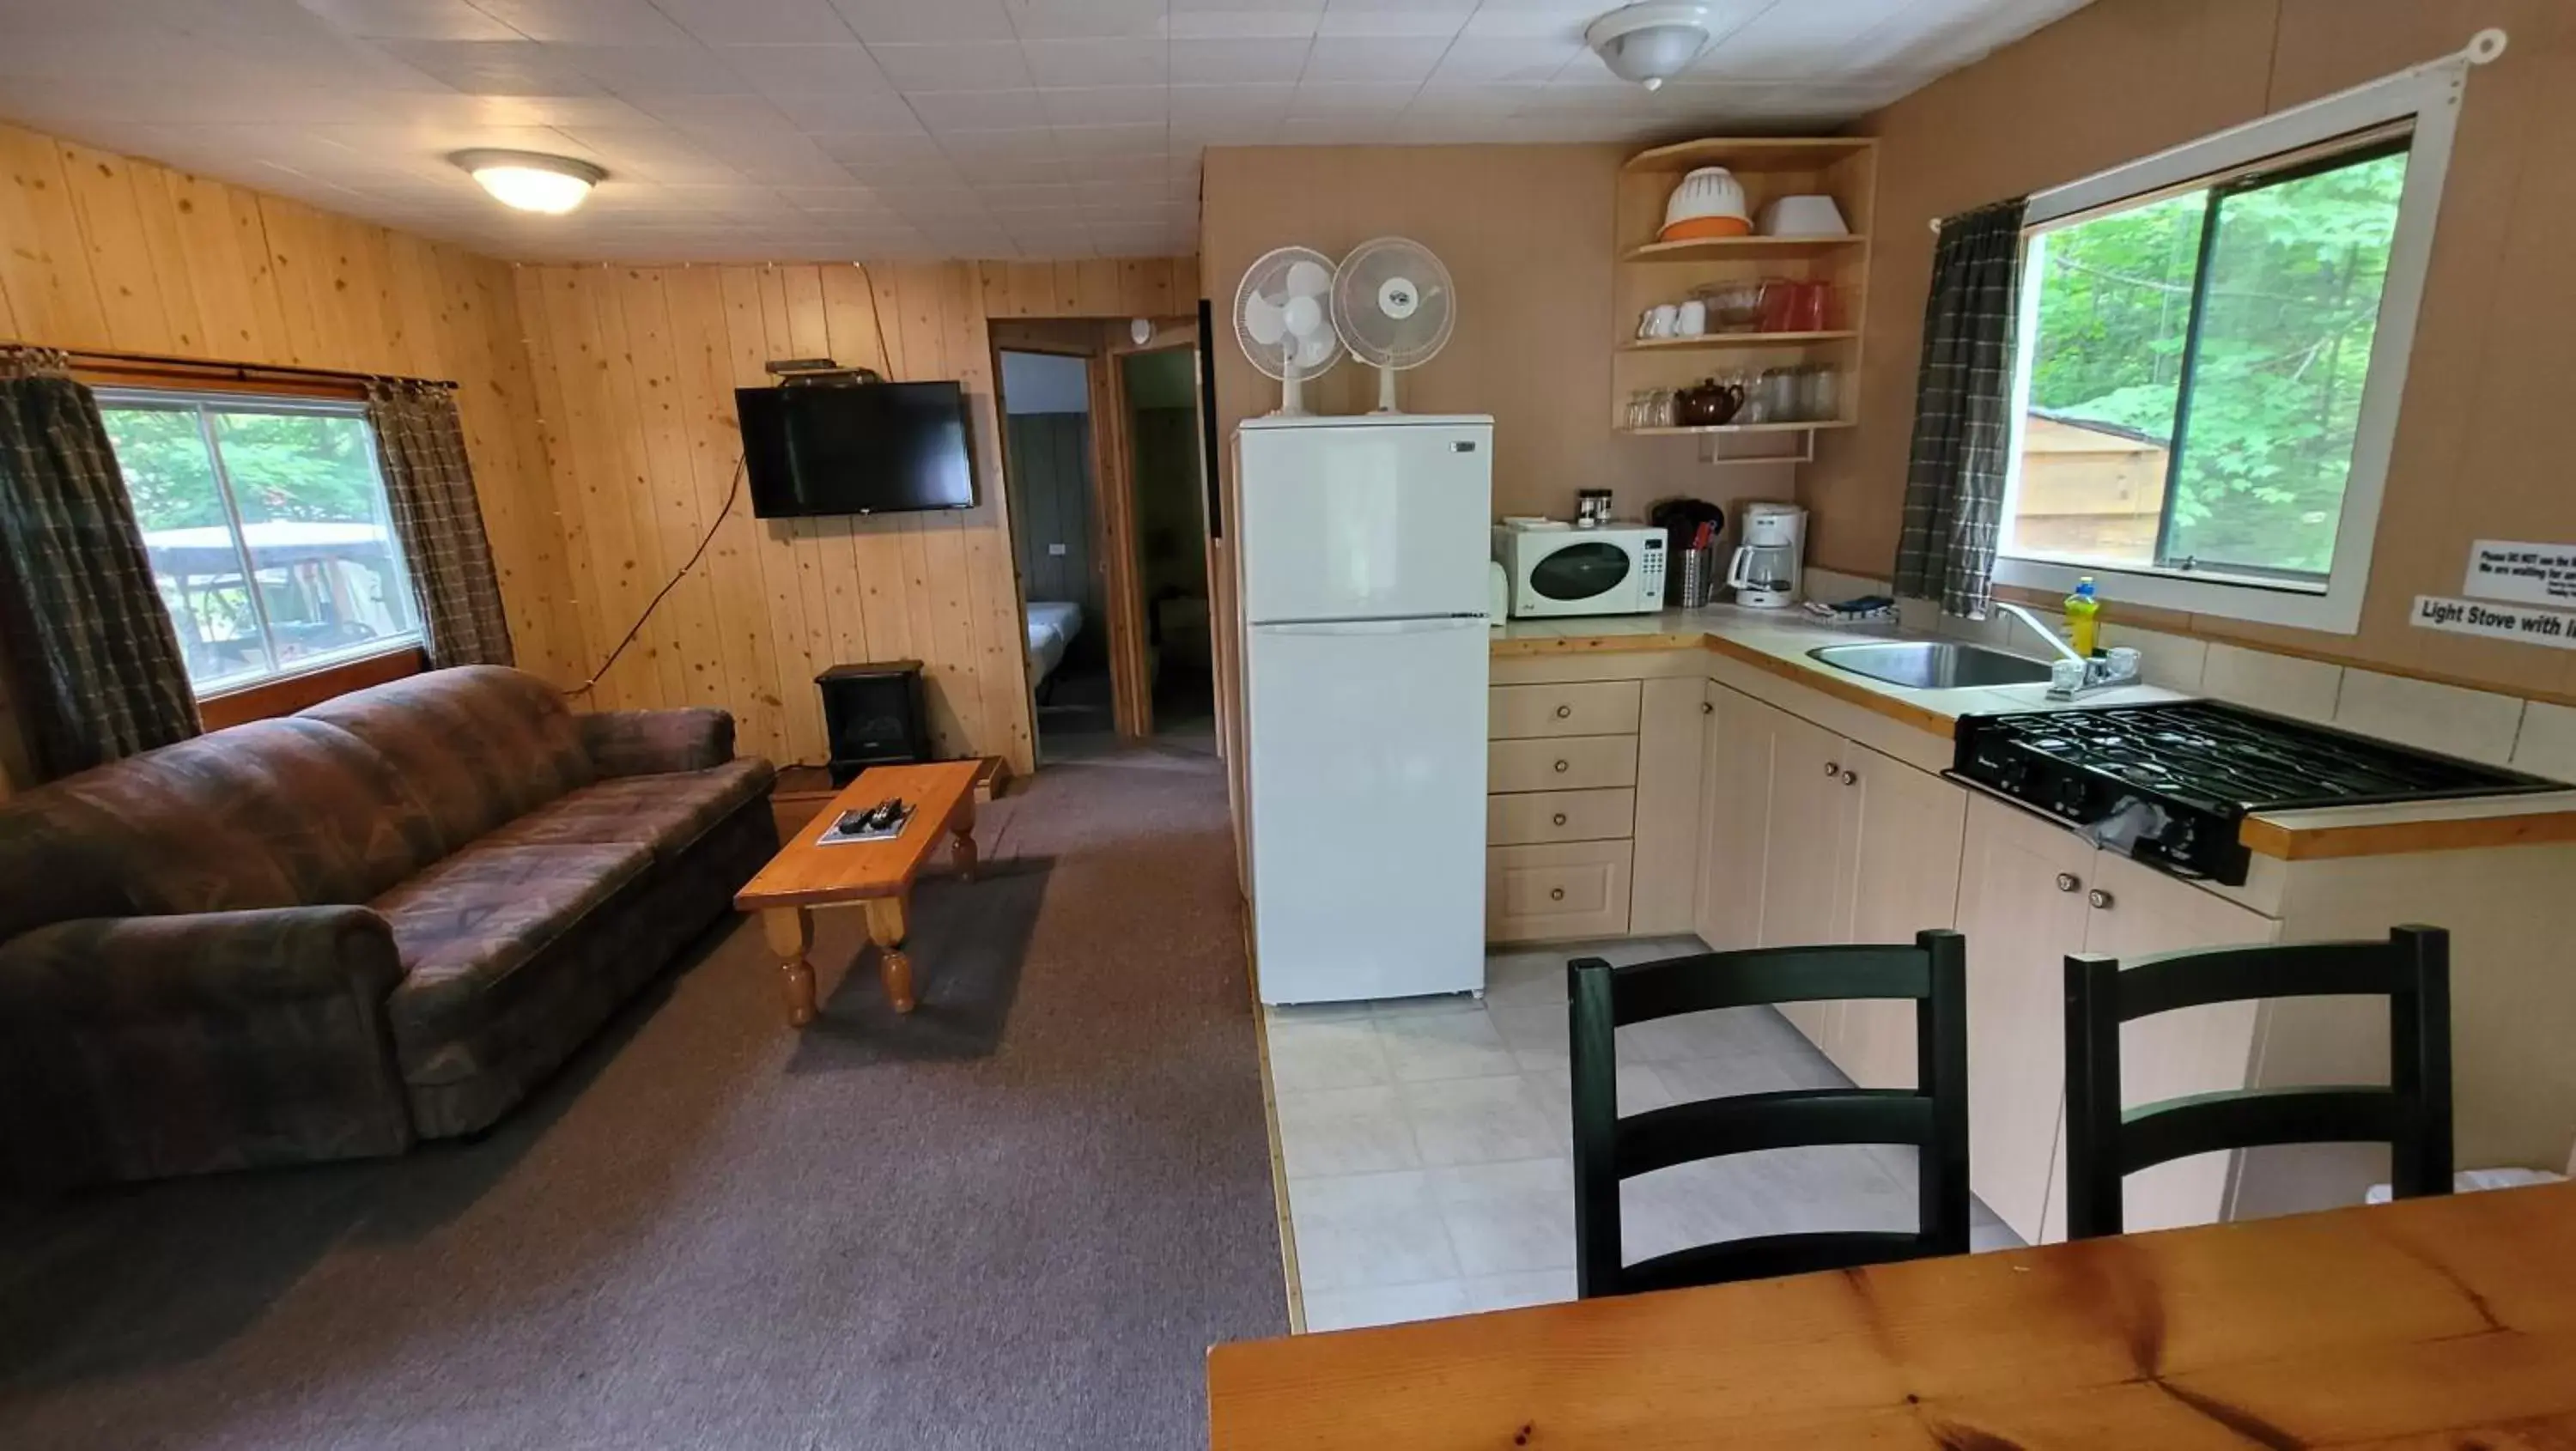 Kitchen/Kitchenette in Parkway Cottage Resort and Trading Post